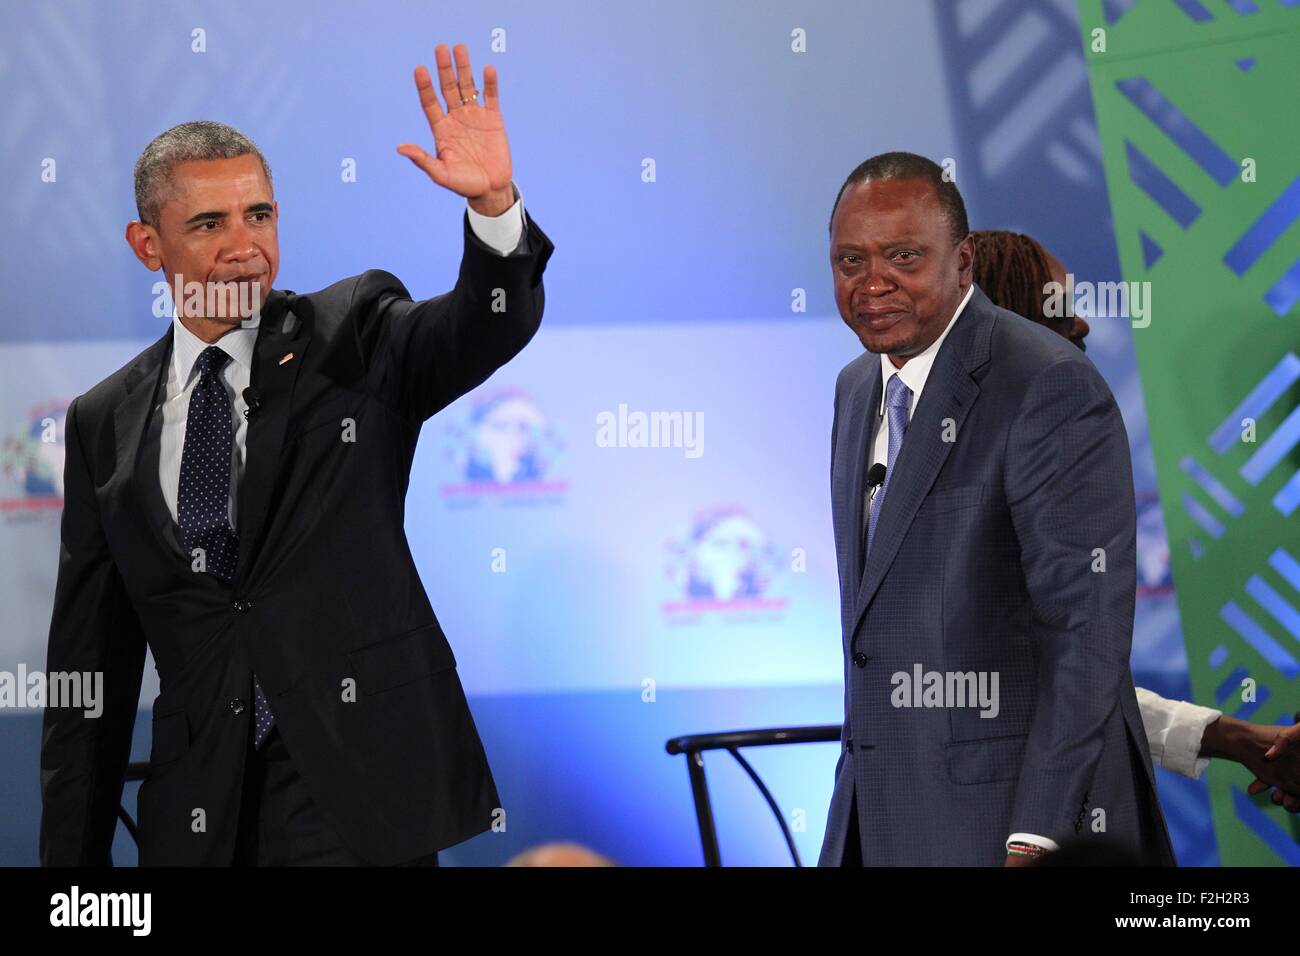 US President Barack Obama and Kenyan President Uhuru Kenyatta leave the stage after taking part in a panel discussion at the Global Entrepreneurship Summit at the United Nations Compound July 25, 2015 in Nairobi, Kenya. Stock Photo